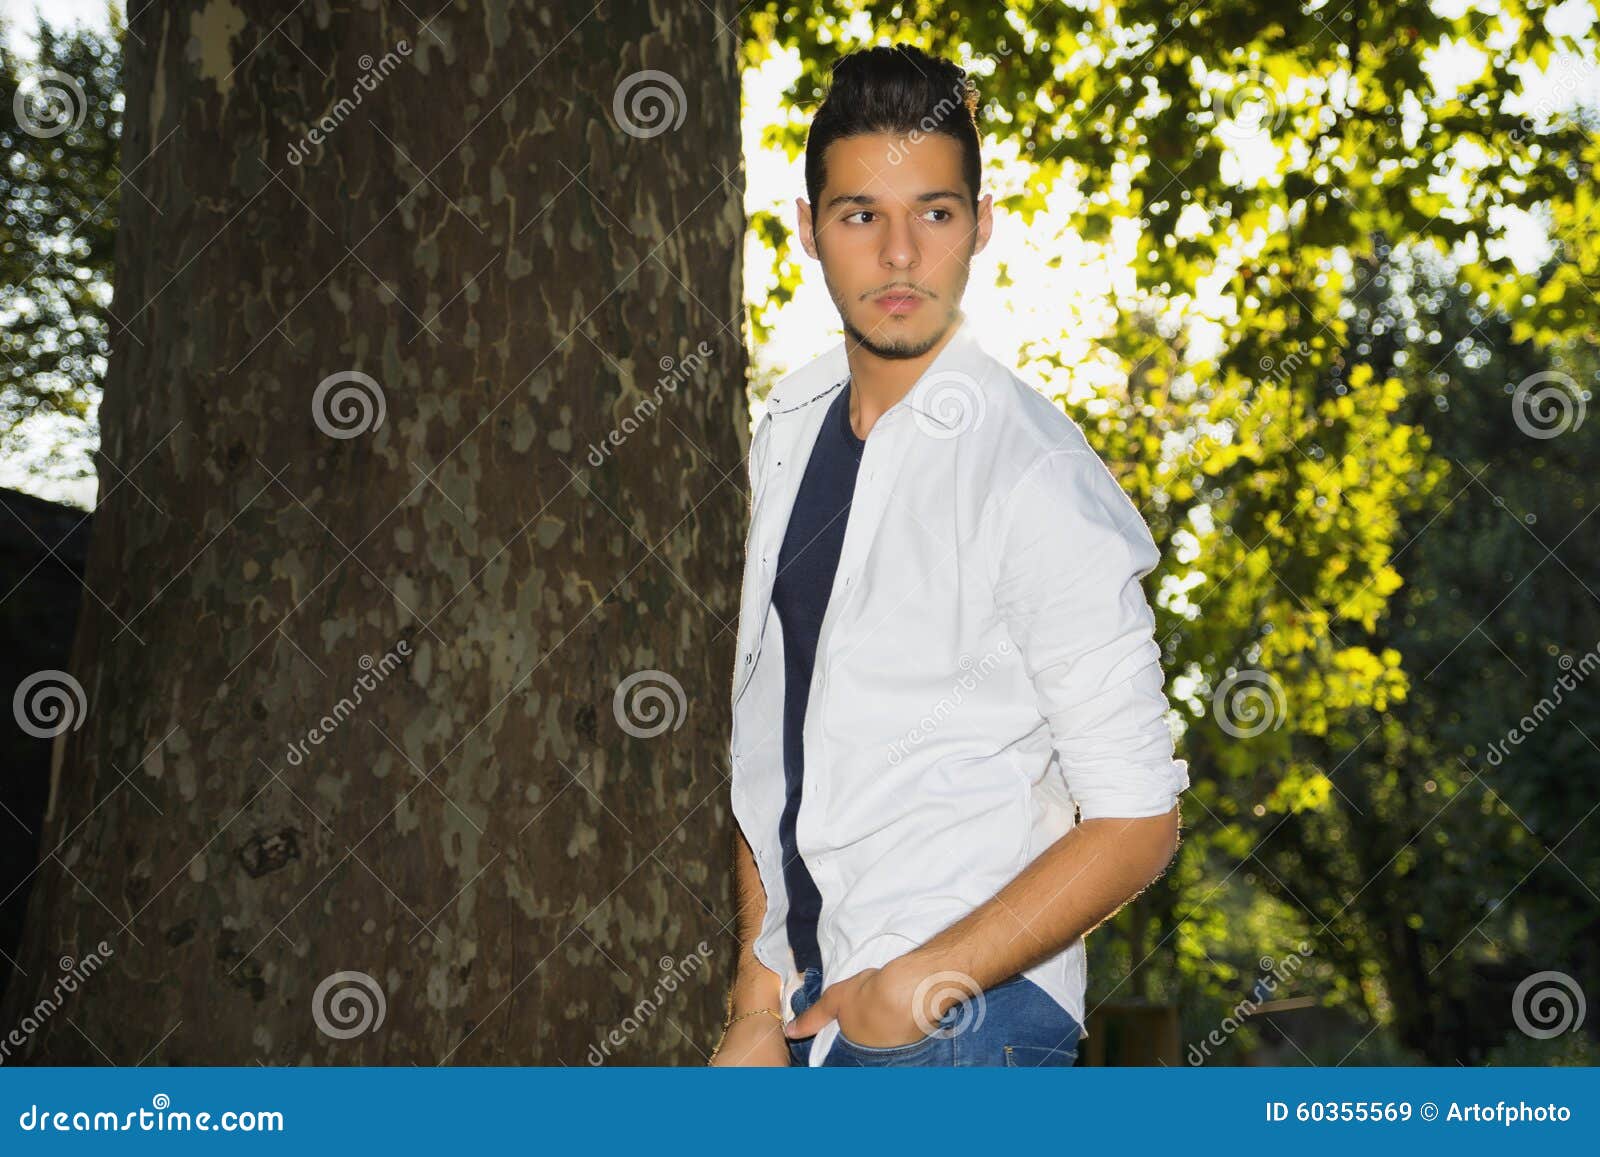 Attractive Young Man in Park Next To Trees Stock Image - Image of leaf ...